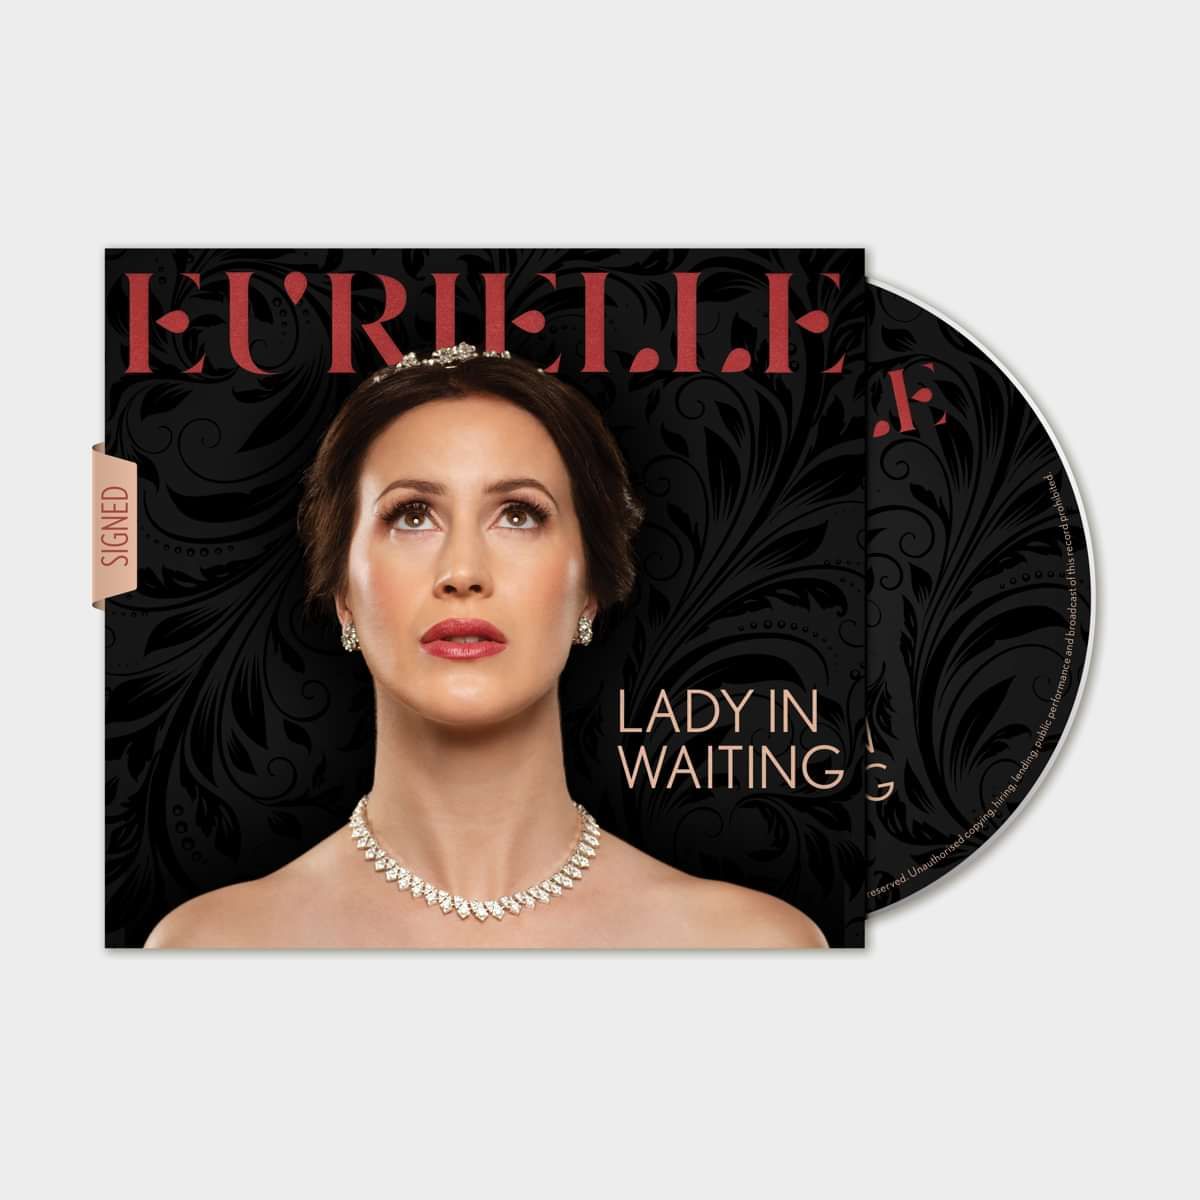 LADY IN WAITING (ALBUM CD - SIGNED) - Eurielle